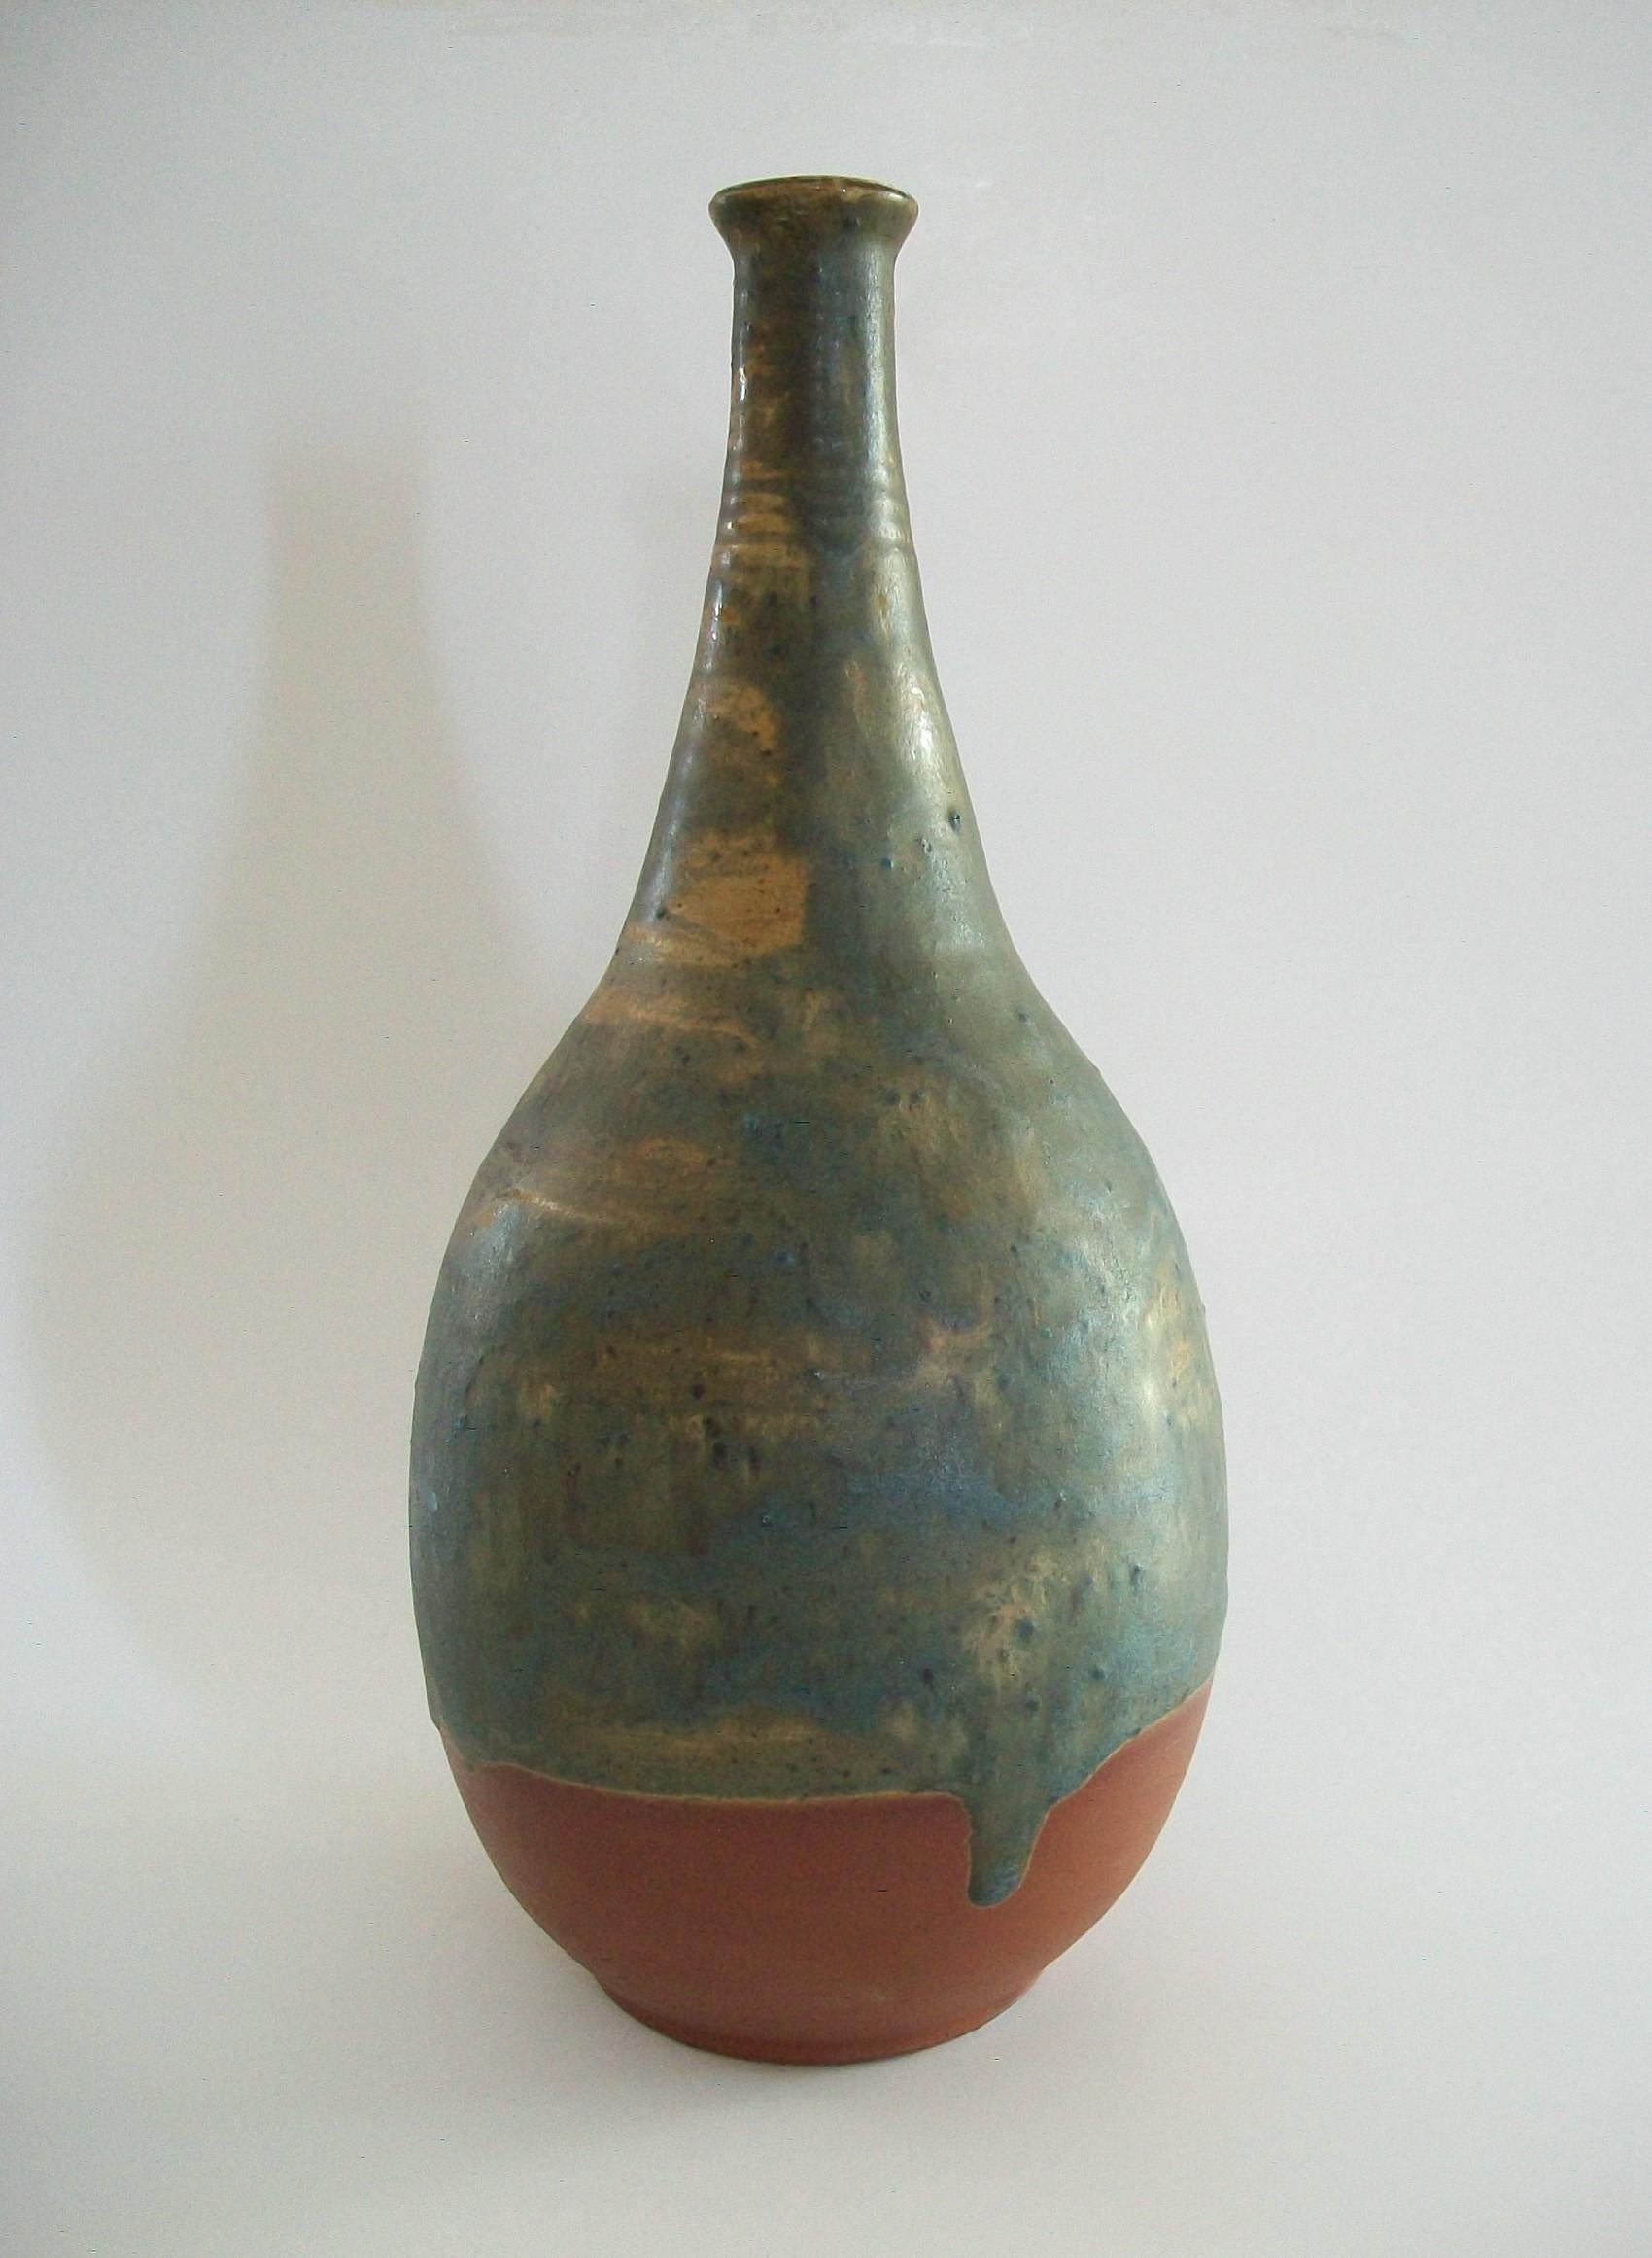 TREIMANE ART POTTERY (Active - 1949 to the early 1990's) - Mid Century studio pottery bottle vase - featuring a wheel thrown terracotta body with a hand painted dripping sand infused textured matte gray glaze over a caramel color glaze to the top